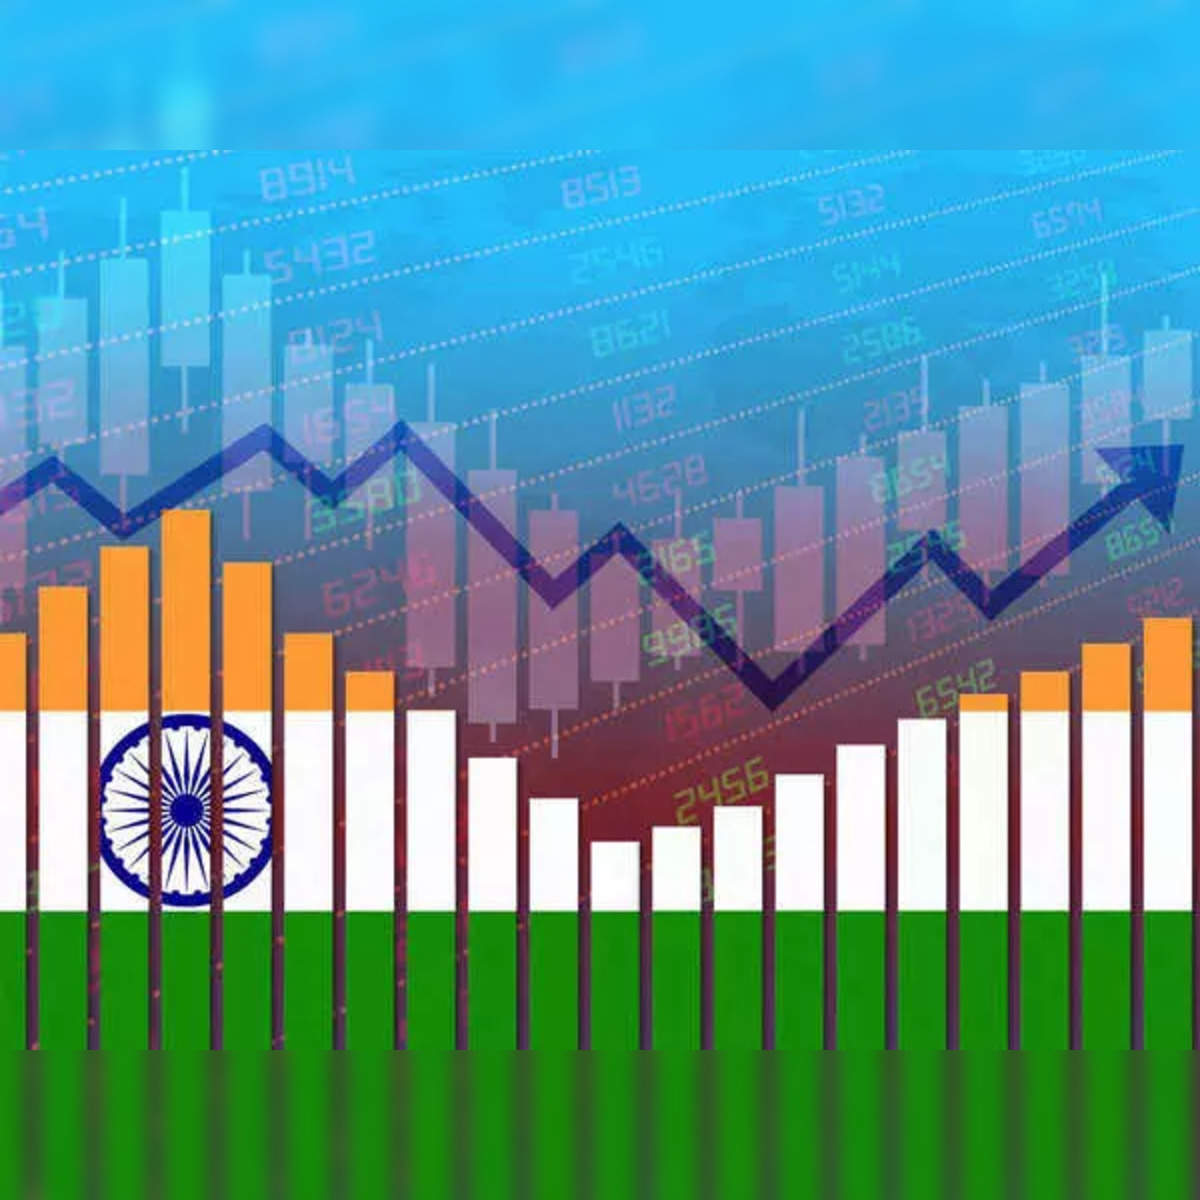 India emerges as the fastest growing country in the world by open